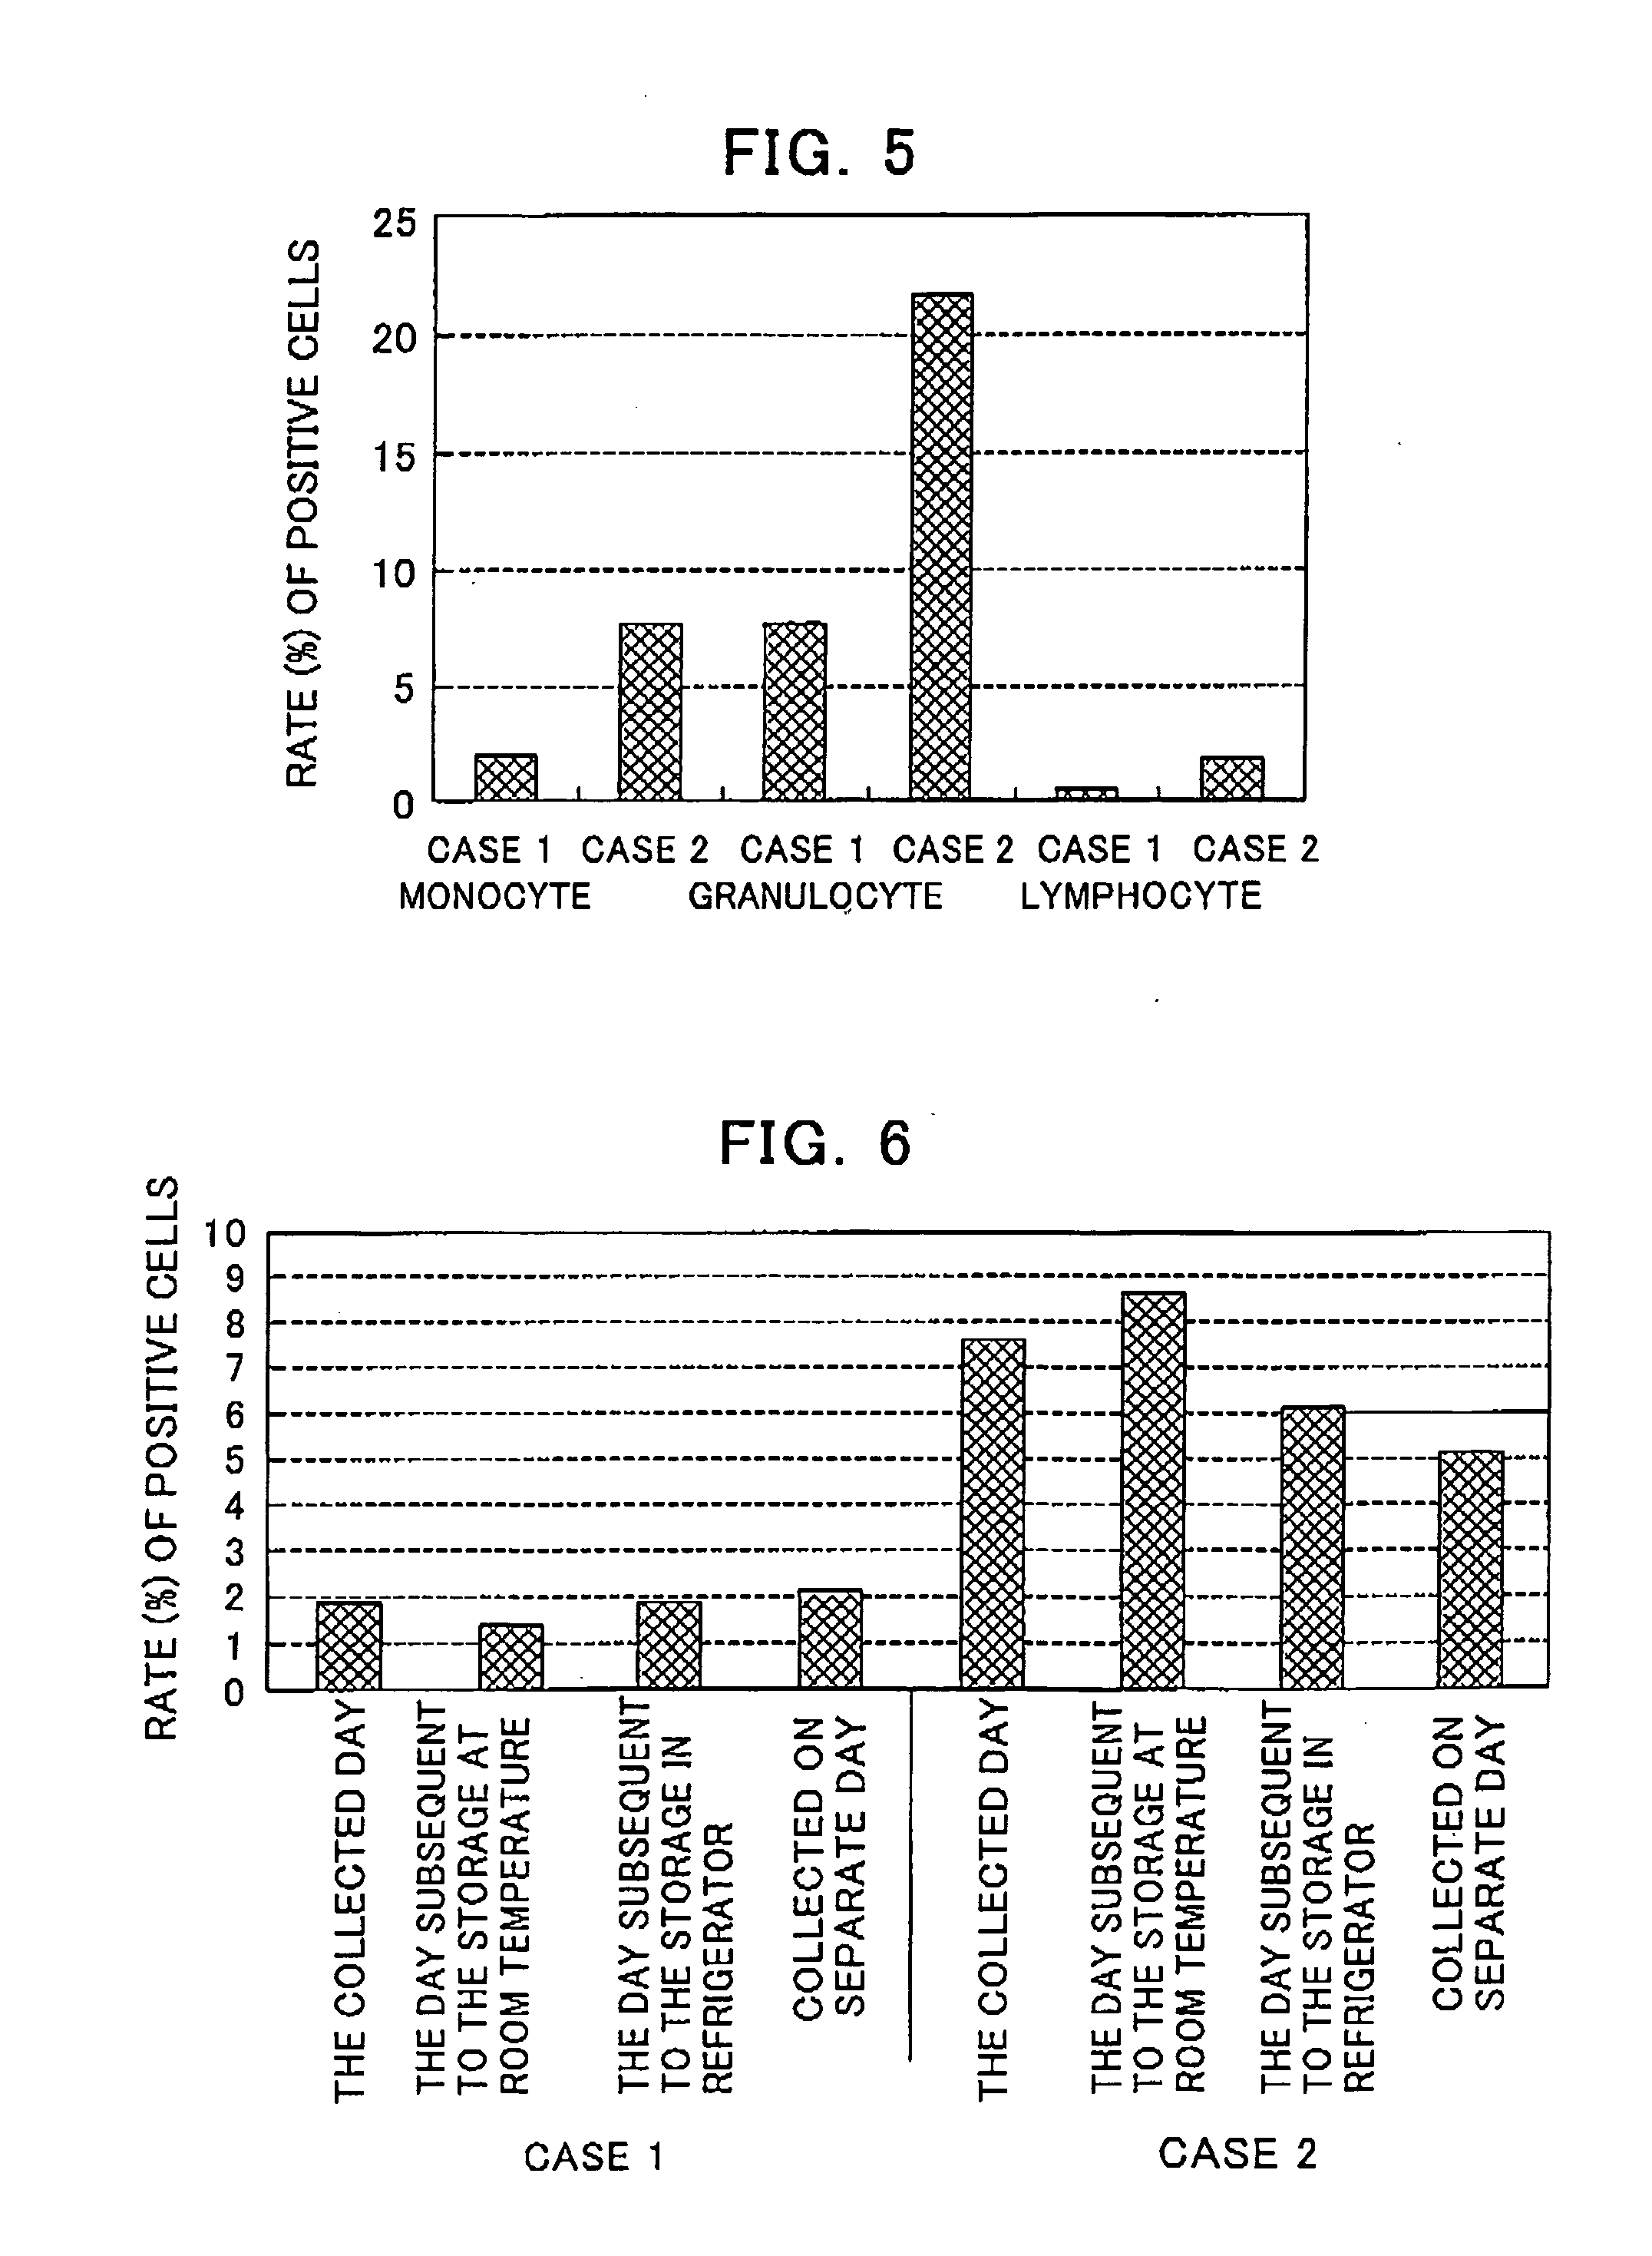 Kit for determining polysaccharide-binding ability of mononuclear cells present in peripheral blood